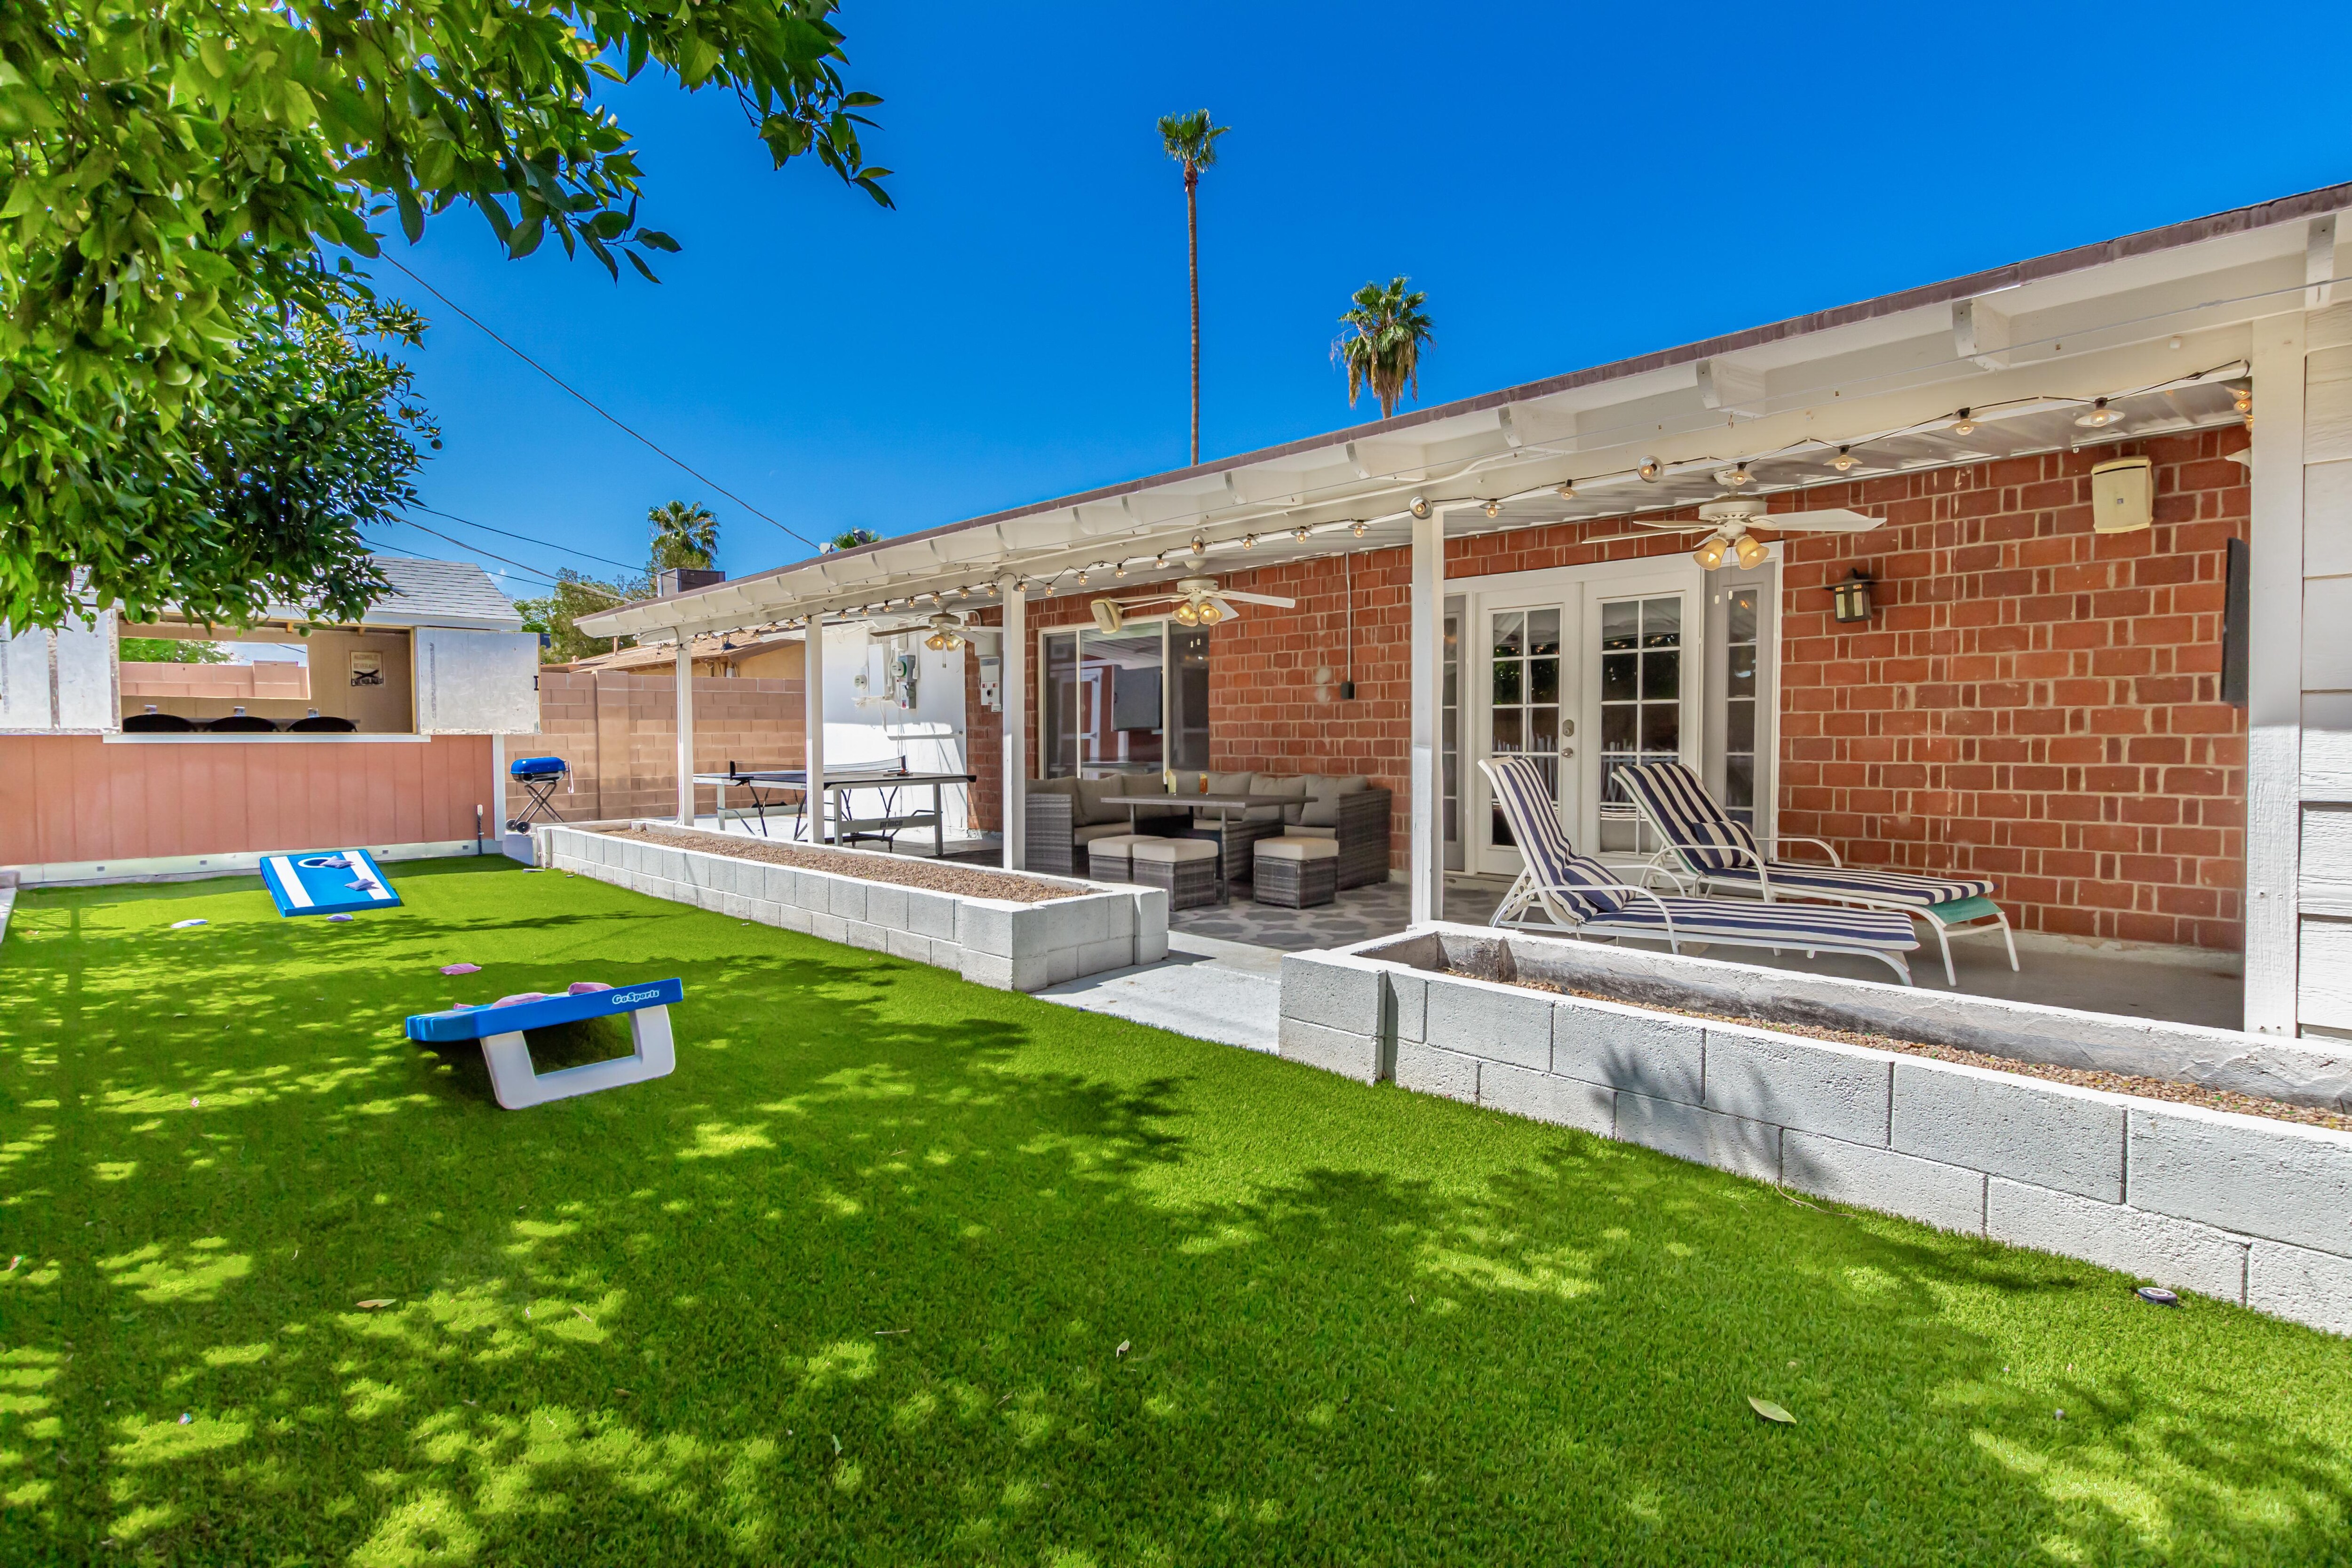 Property Image 2 - Scottsdale and the City - Private Backyard - Heart of Old Town